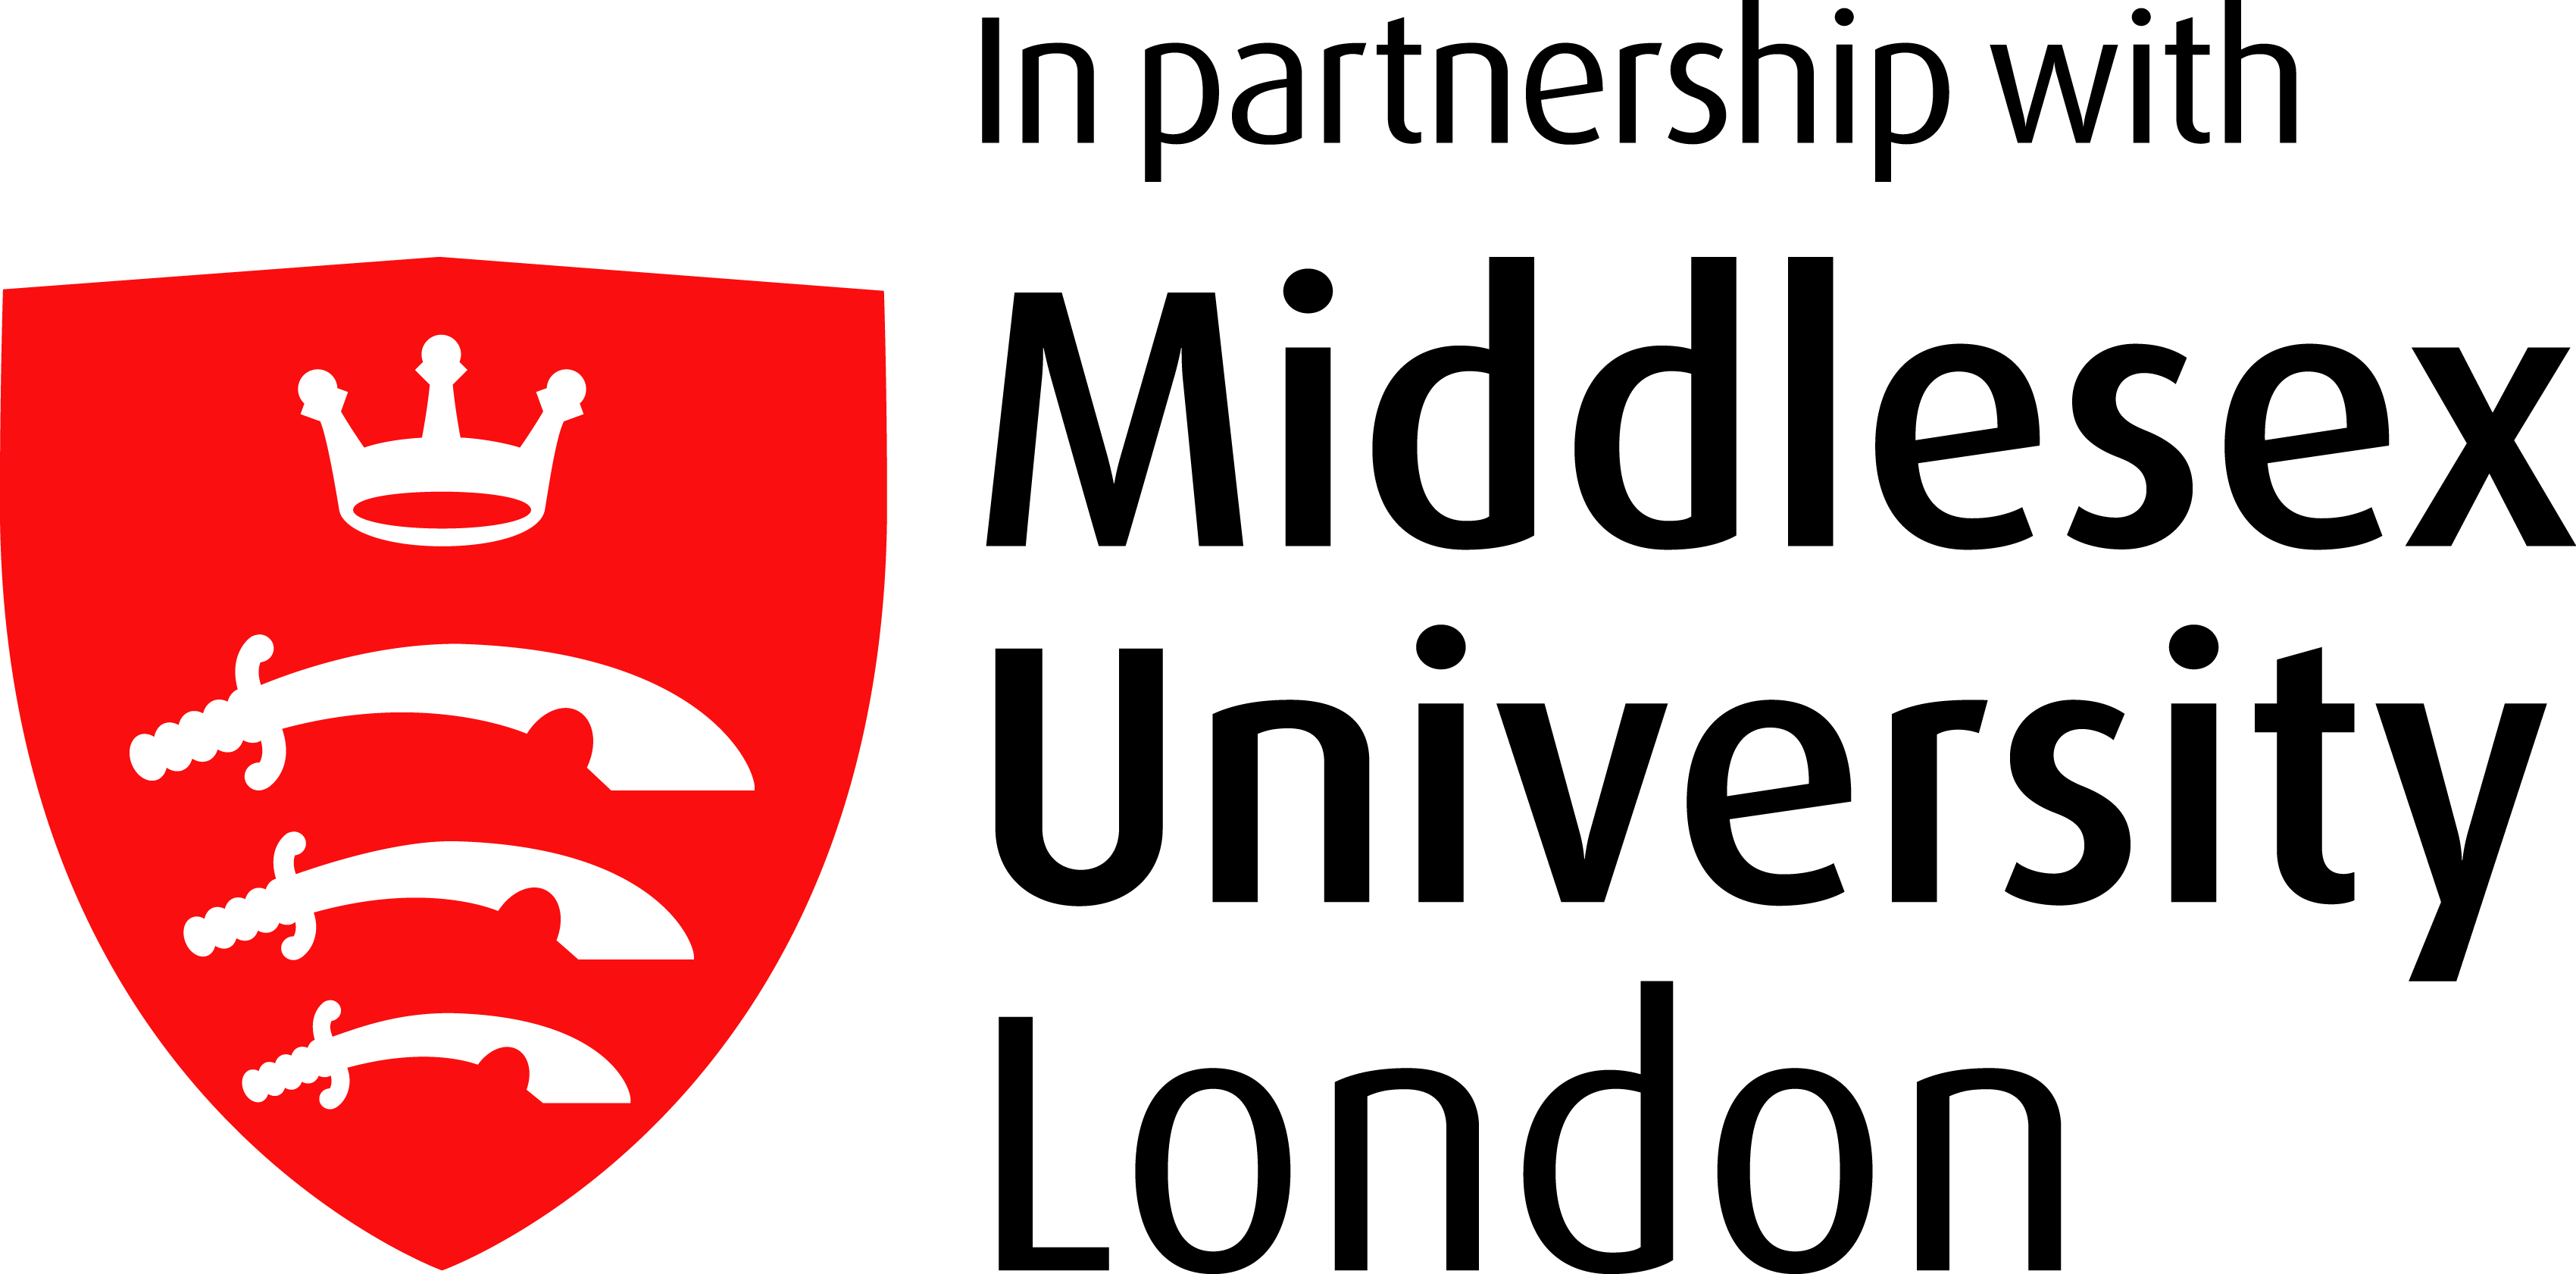 In partnership with Middlesex University logo